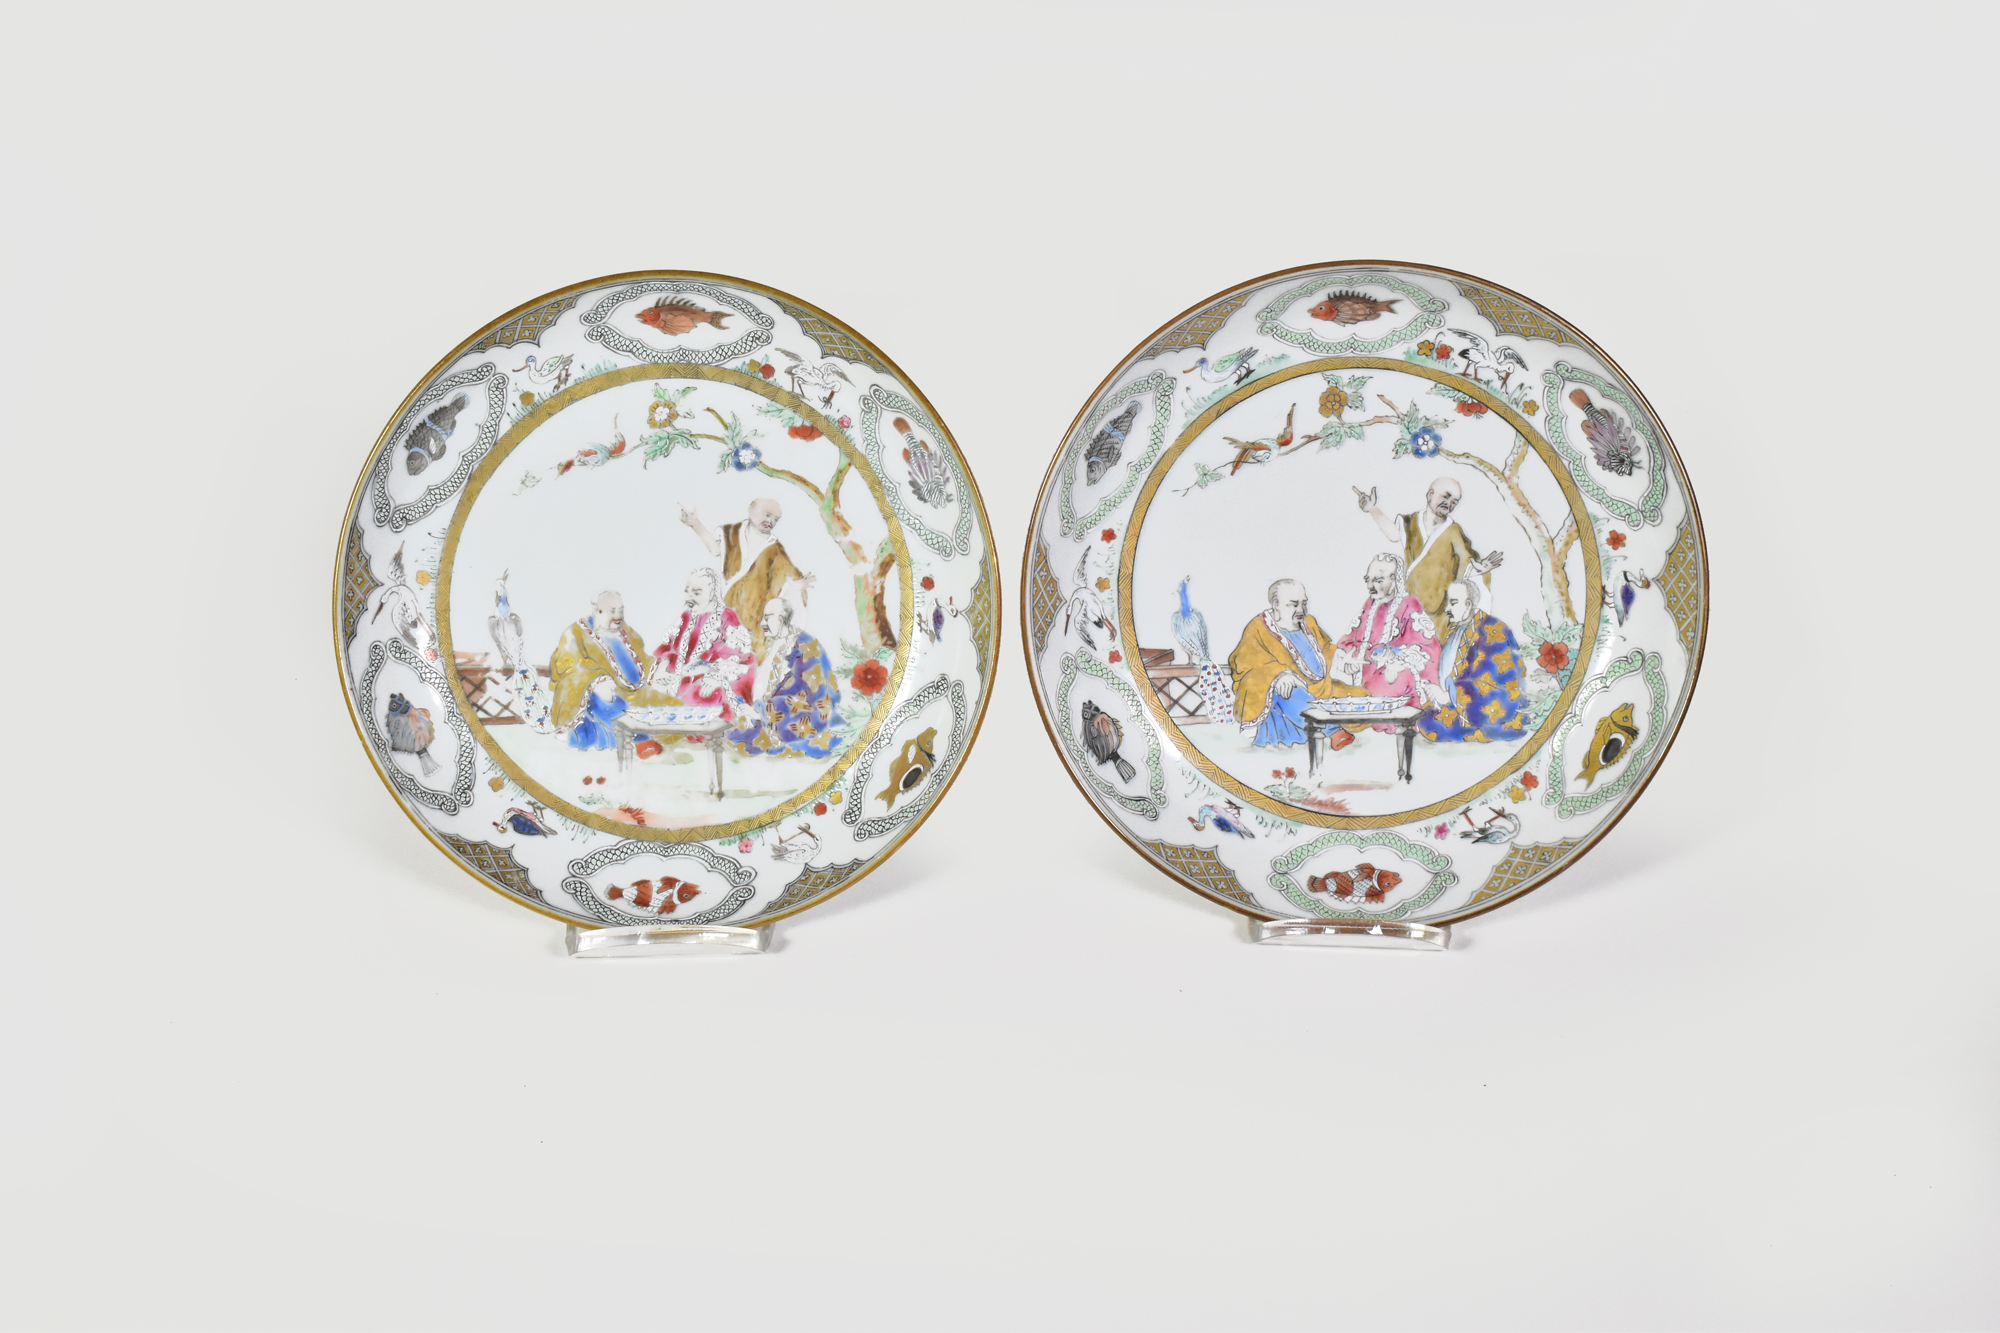 A PAIR OF CHINESE EXPORT ‘FAMILLE ROSE’ ‘PRONK DOCTOR’S VISIT' SAUCER DISHES, QIANLONG, CIRCA 1740